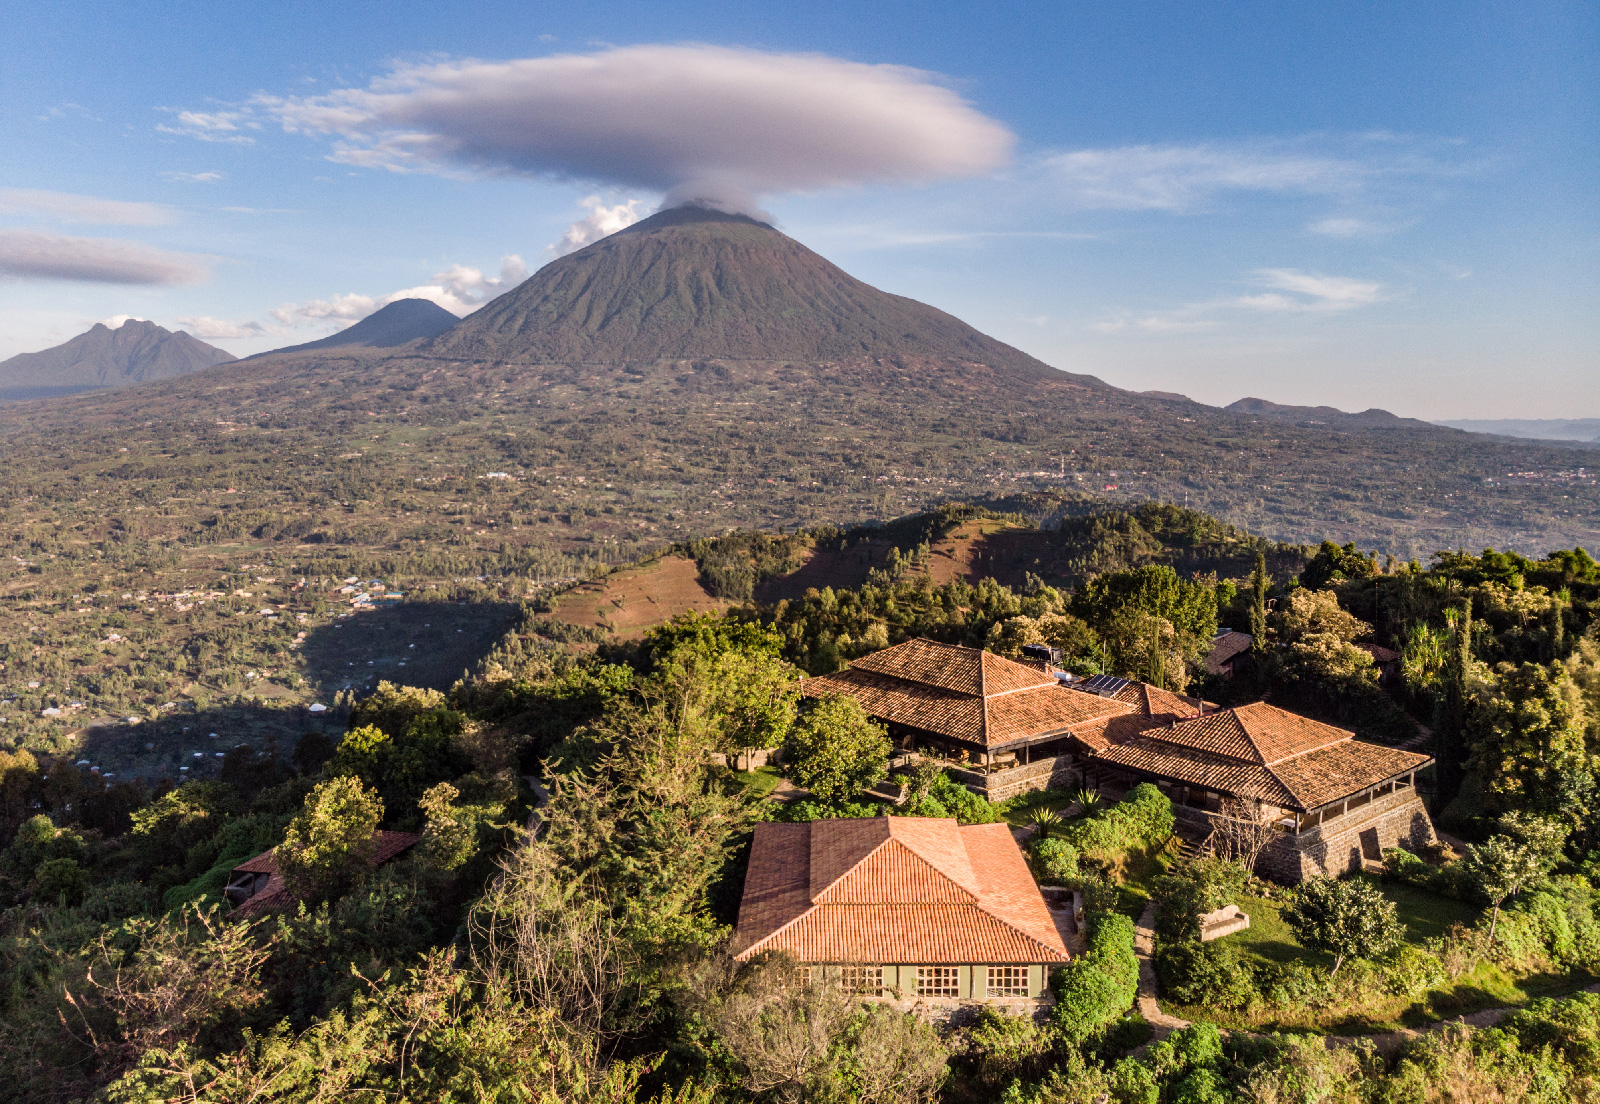 Catching Up with Great Scenery and Gorillas in the Virunga